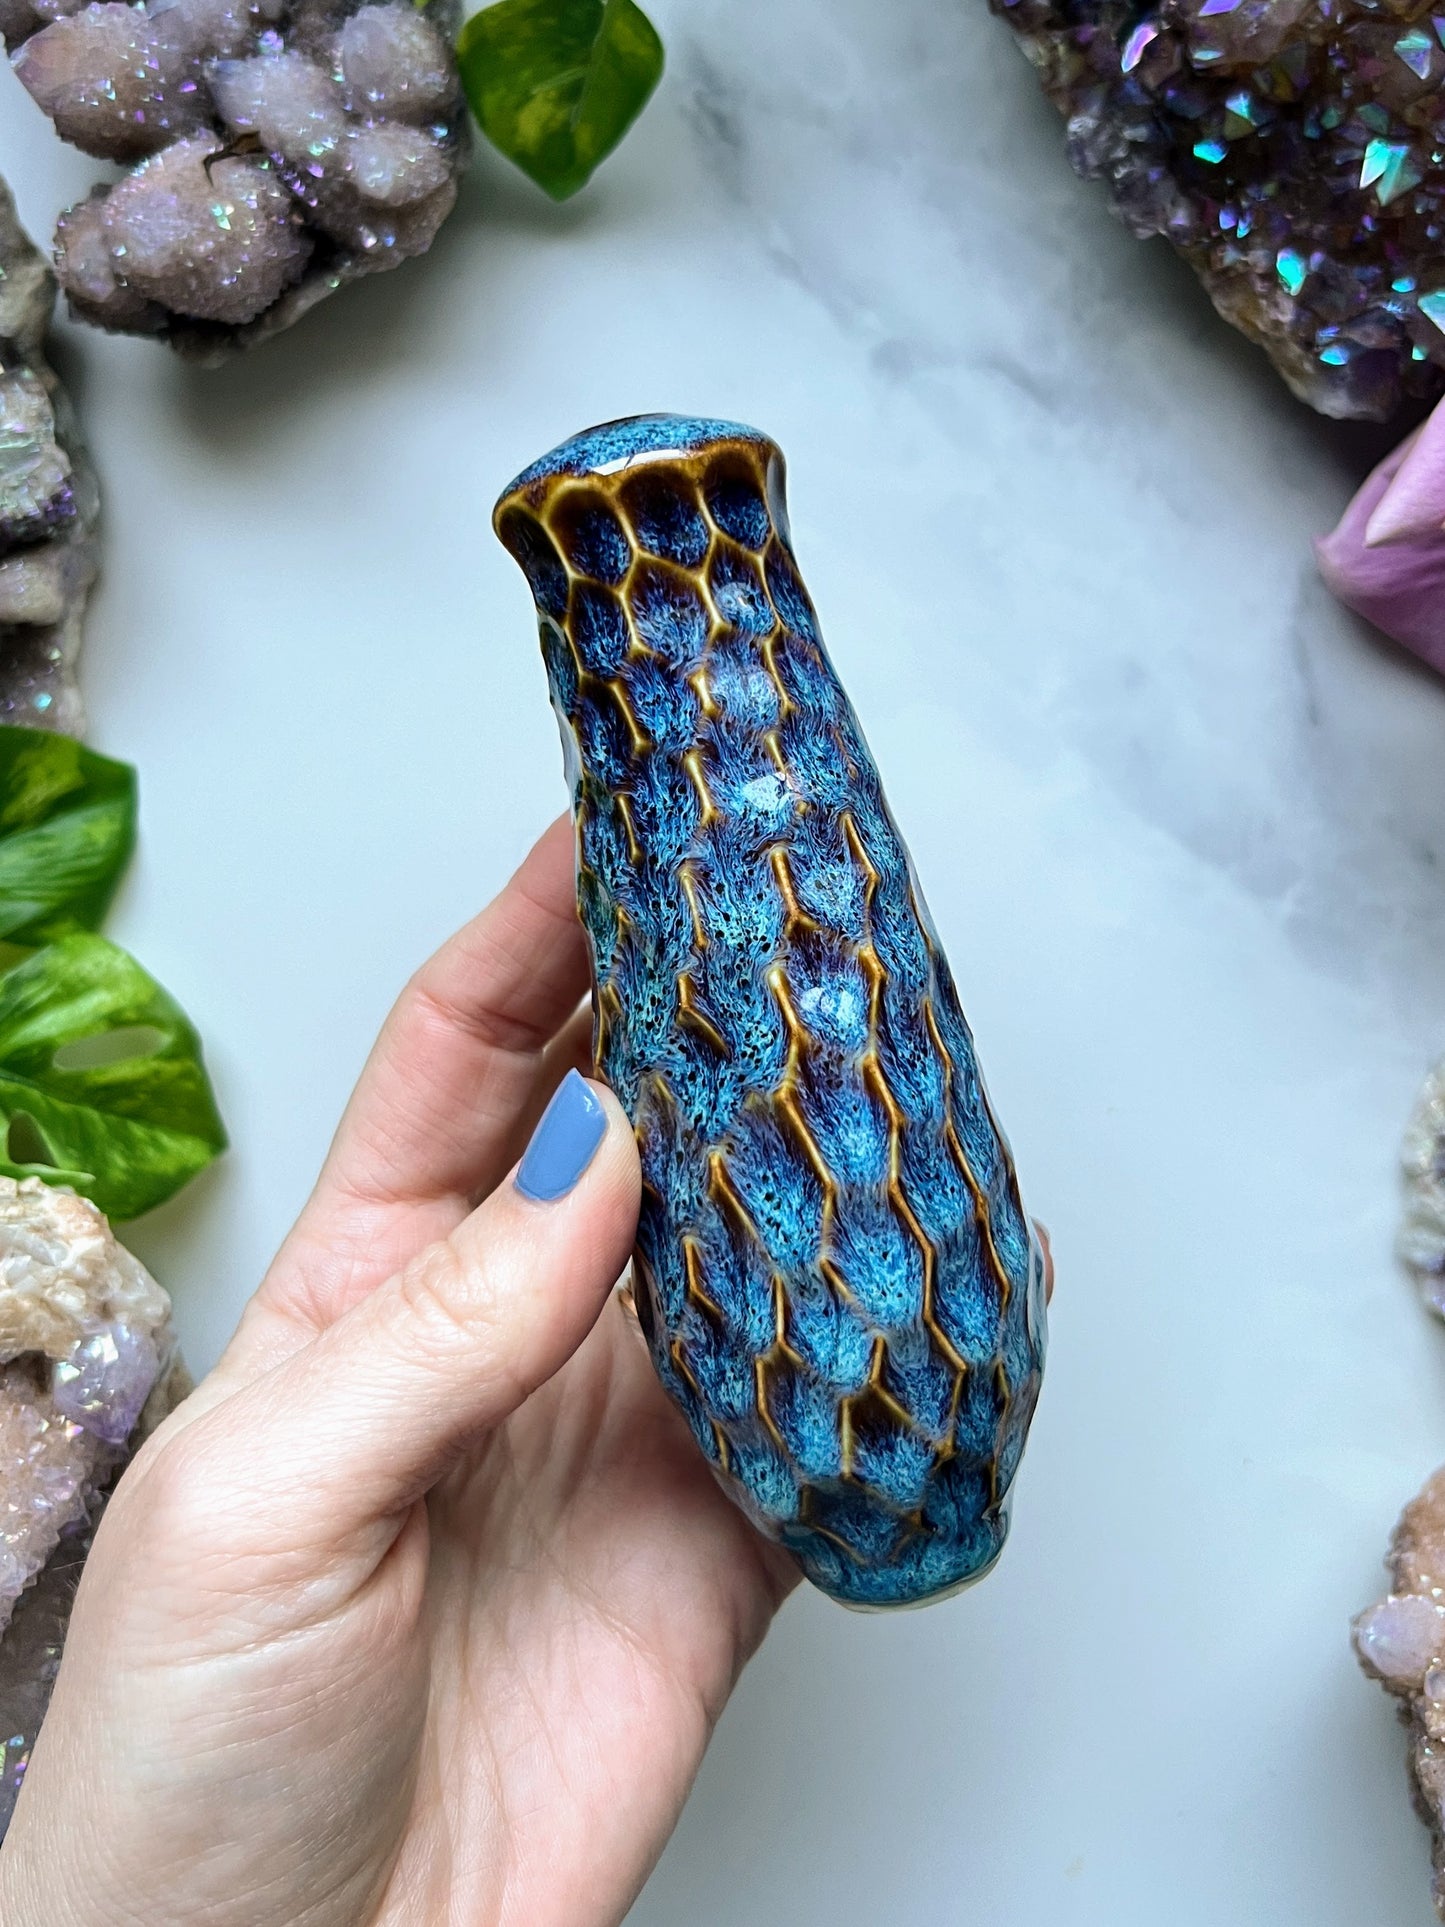 Crazy Lace Agate Pipe Honey Comb Carved Details, Porcelain Ceramic Smoking Pipe